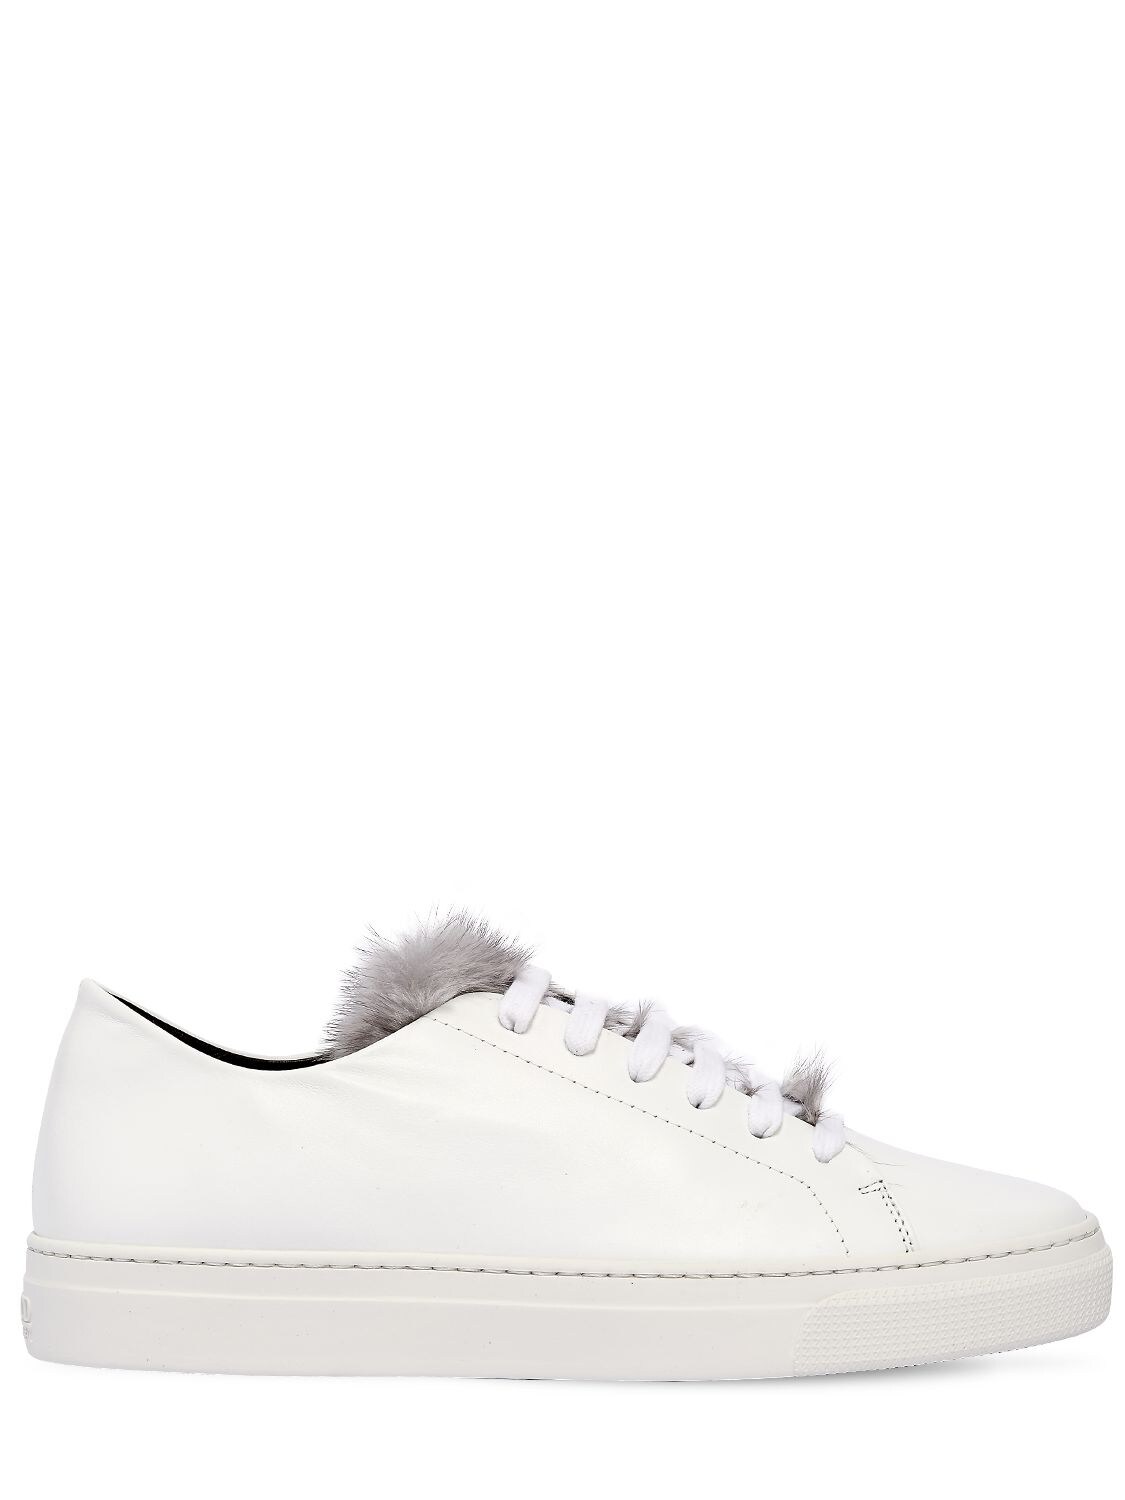 Zcd Montreal 20mm Niki Leather & Mink Sneakers In White/grey